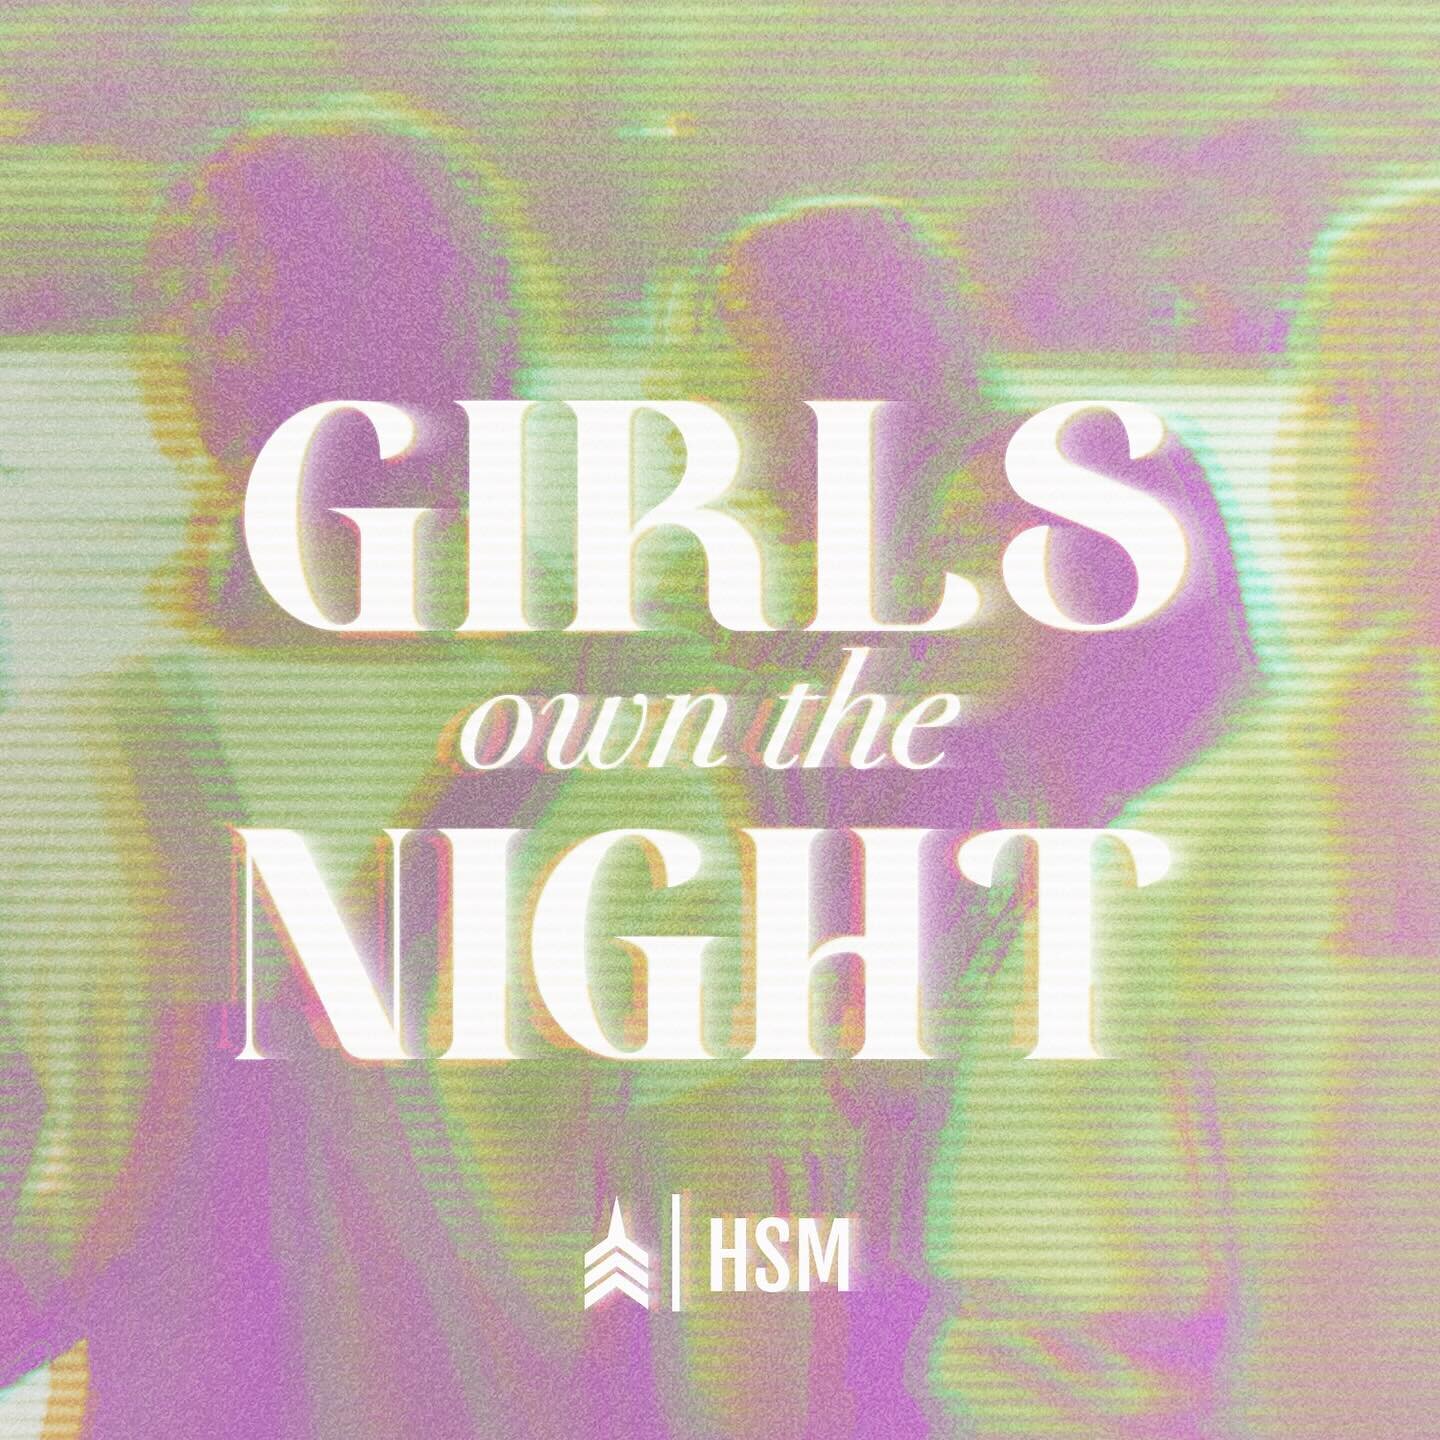 There are a lot of big events coming up in the next few weeks here at HSM! 

One that we&rsquo;re super excited about is 2 weeks out, on February 18th. It&rsquo;s our last Vertical Men Night + Girls Own the Night of the year! Guys, be at the SL campu